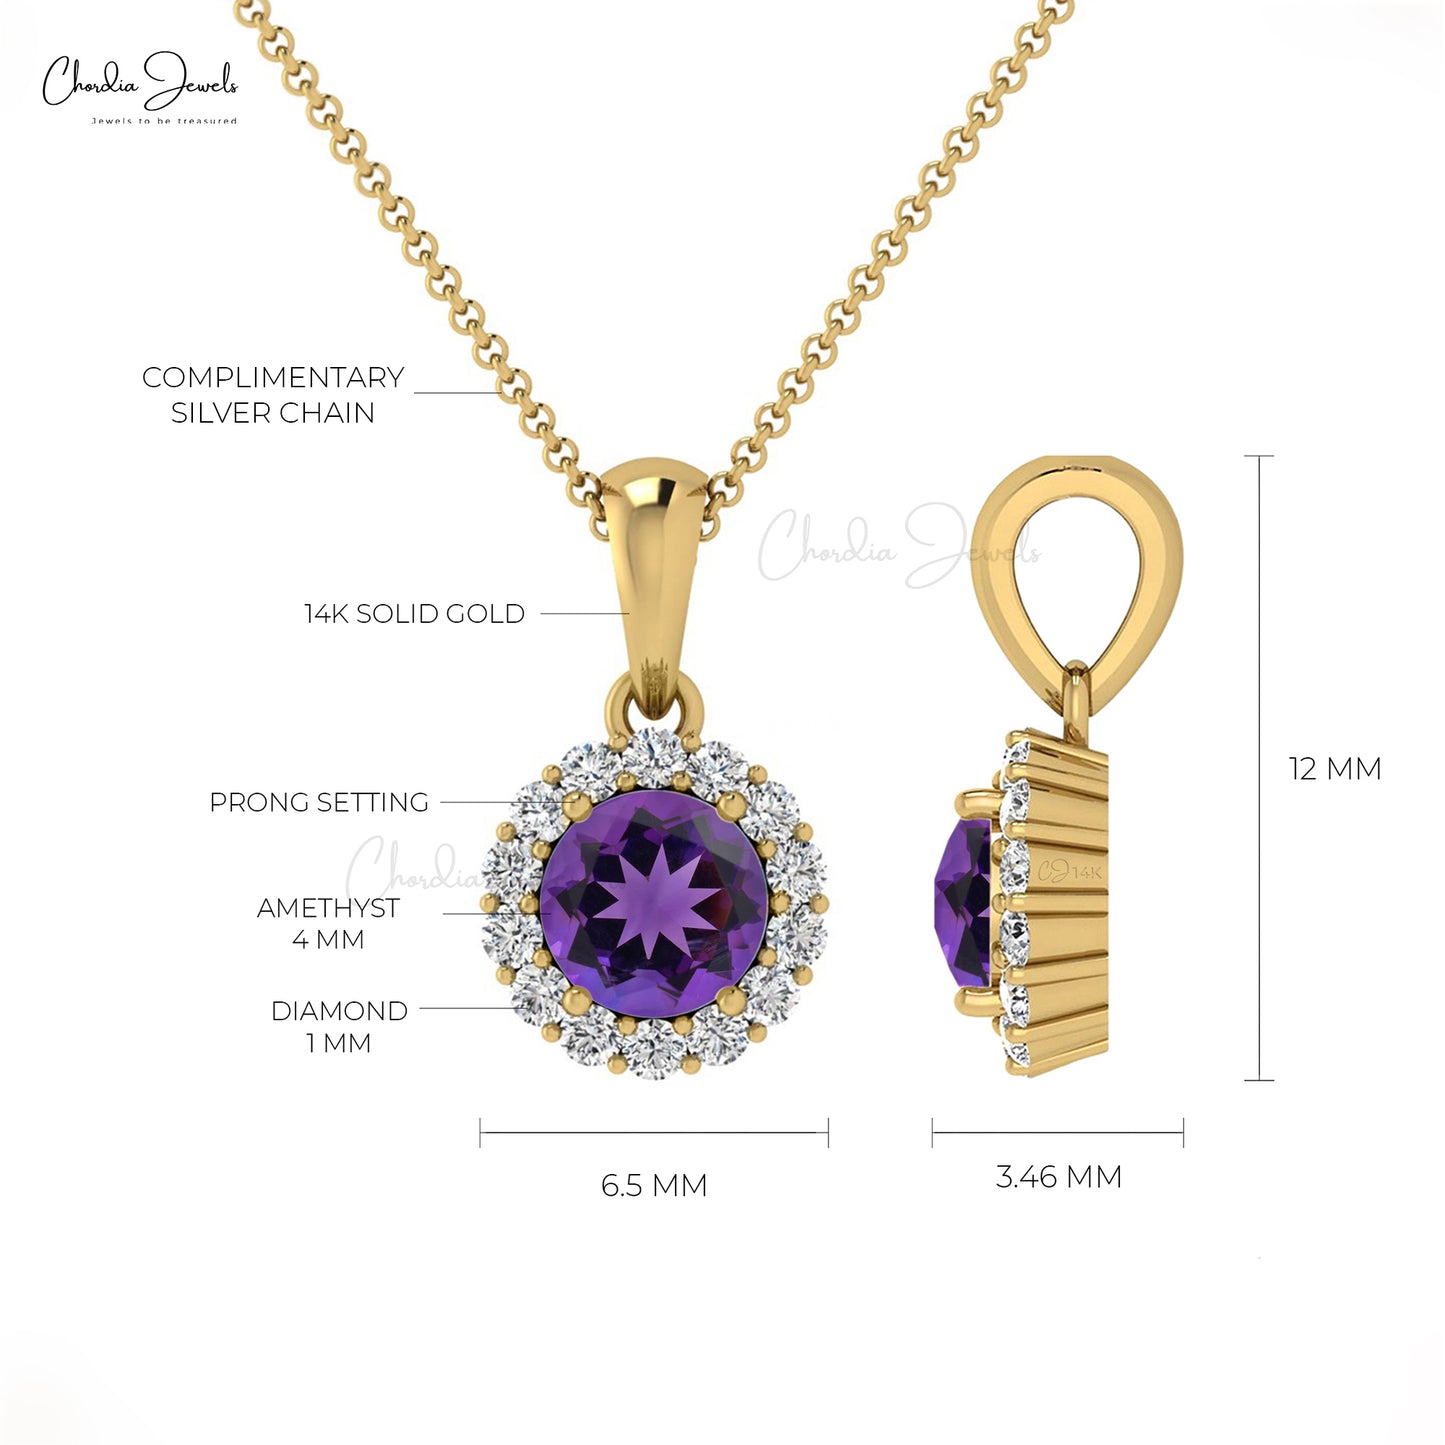 Load image into Gallery viewer, Natural Amethyst Pendant, 14k Solid Gold Diamond Pendant, 4mm Round Cut Gemstone Halo Pendant Gift for Wife
